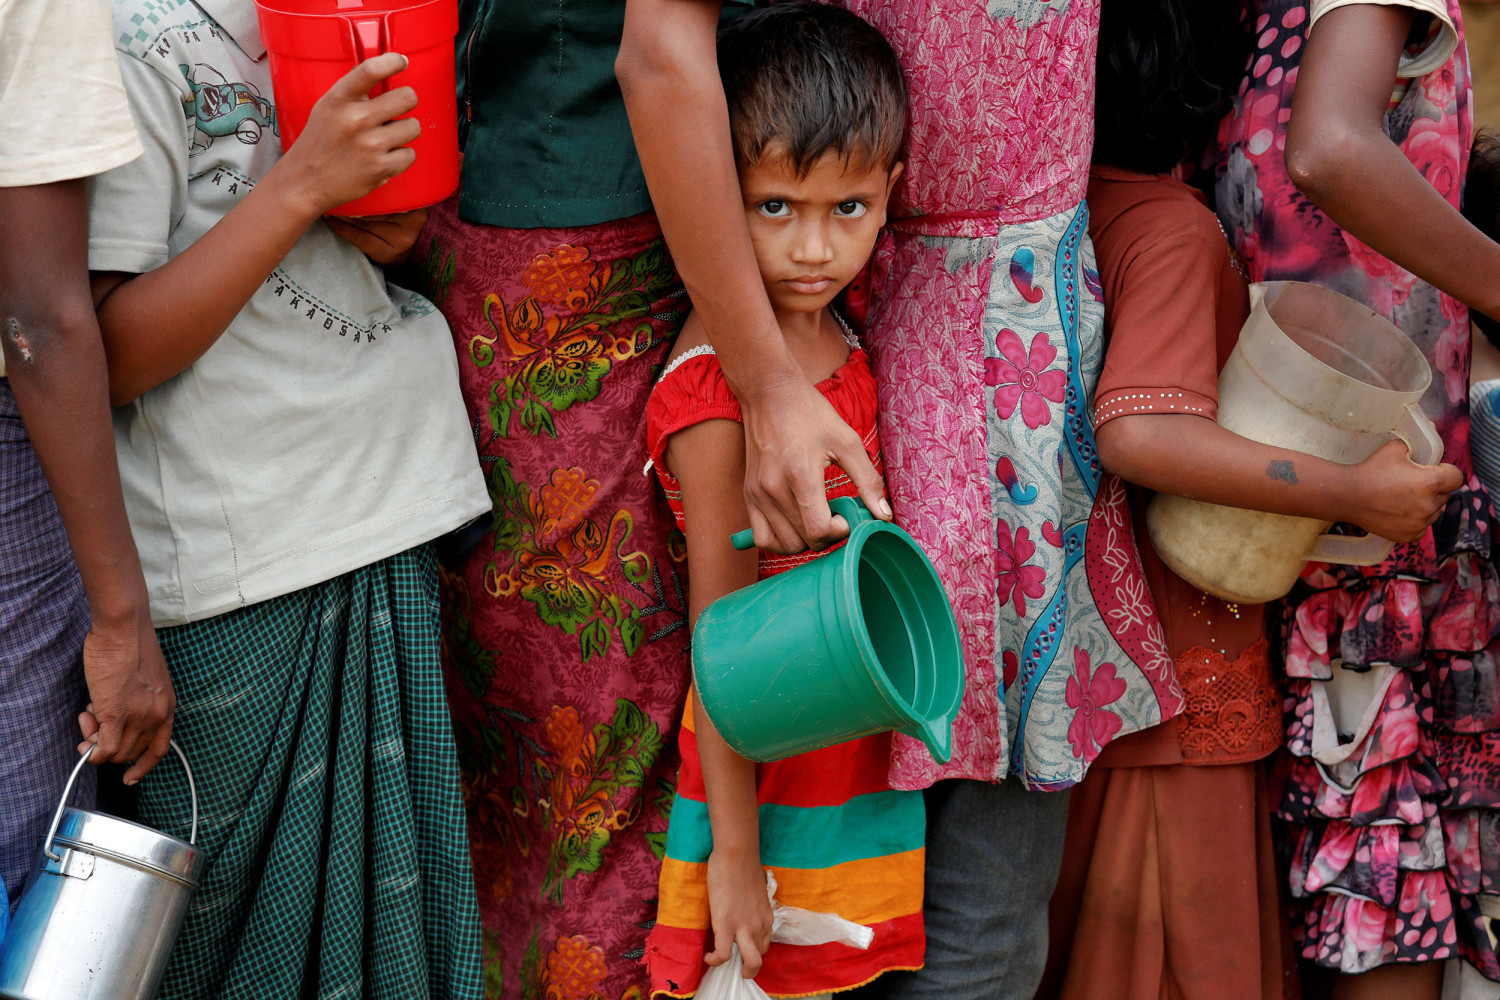 Violent rape just one of many disasters for Rohingya refugees